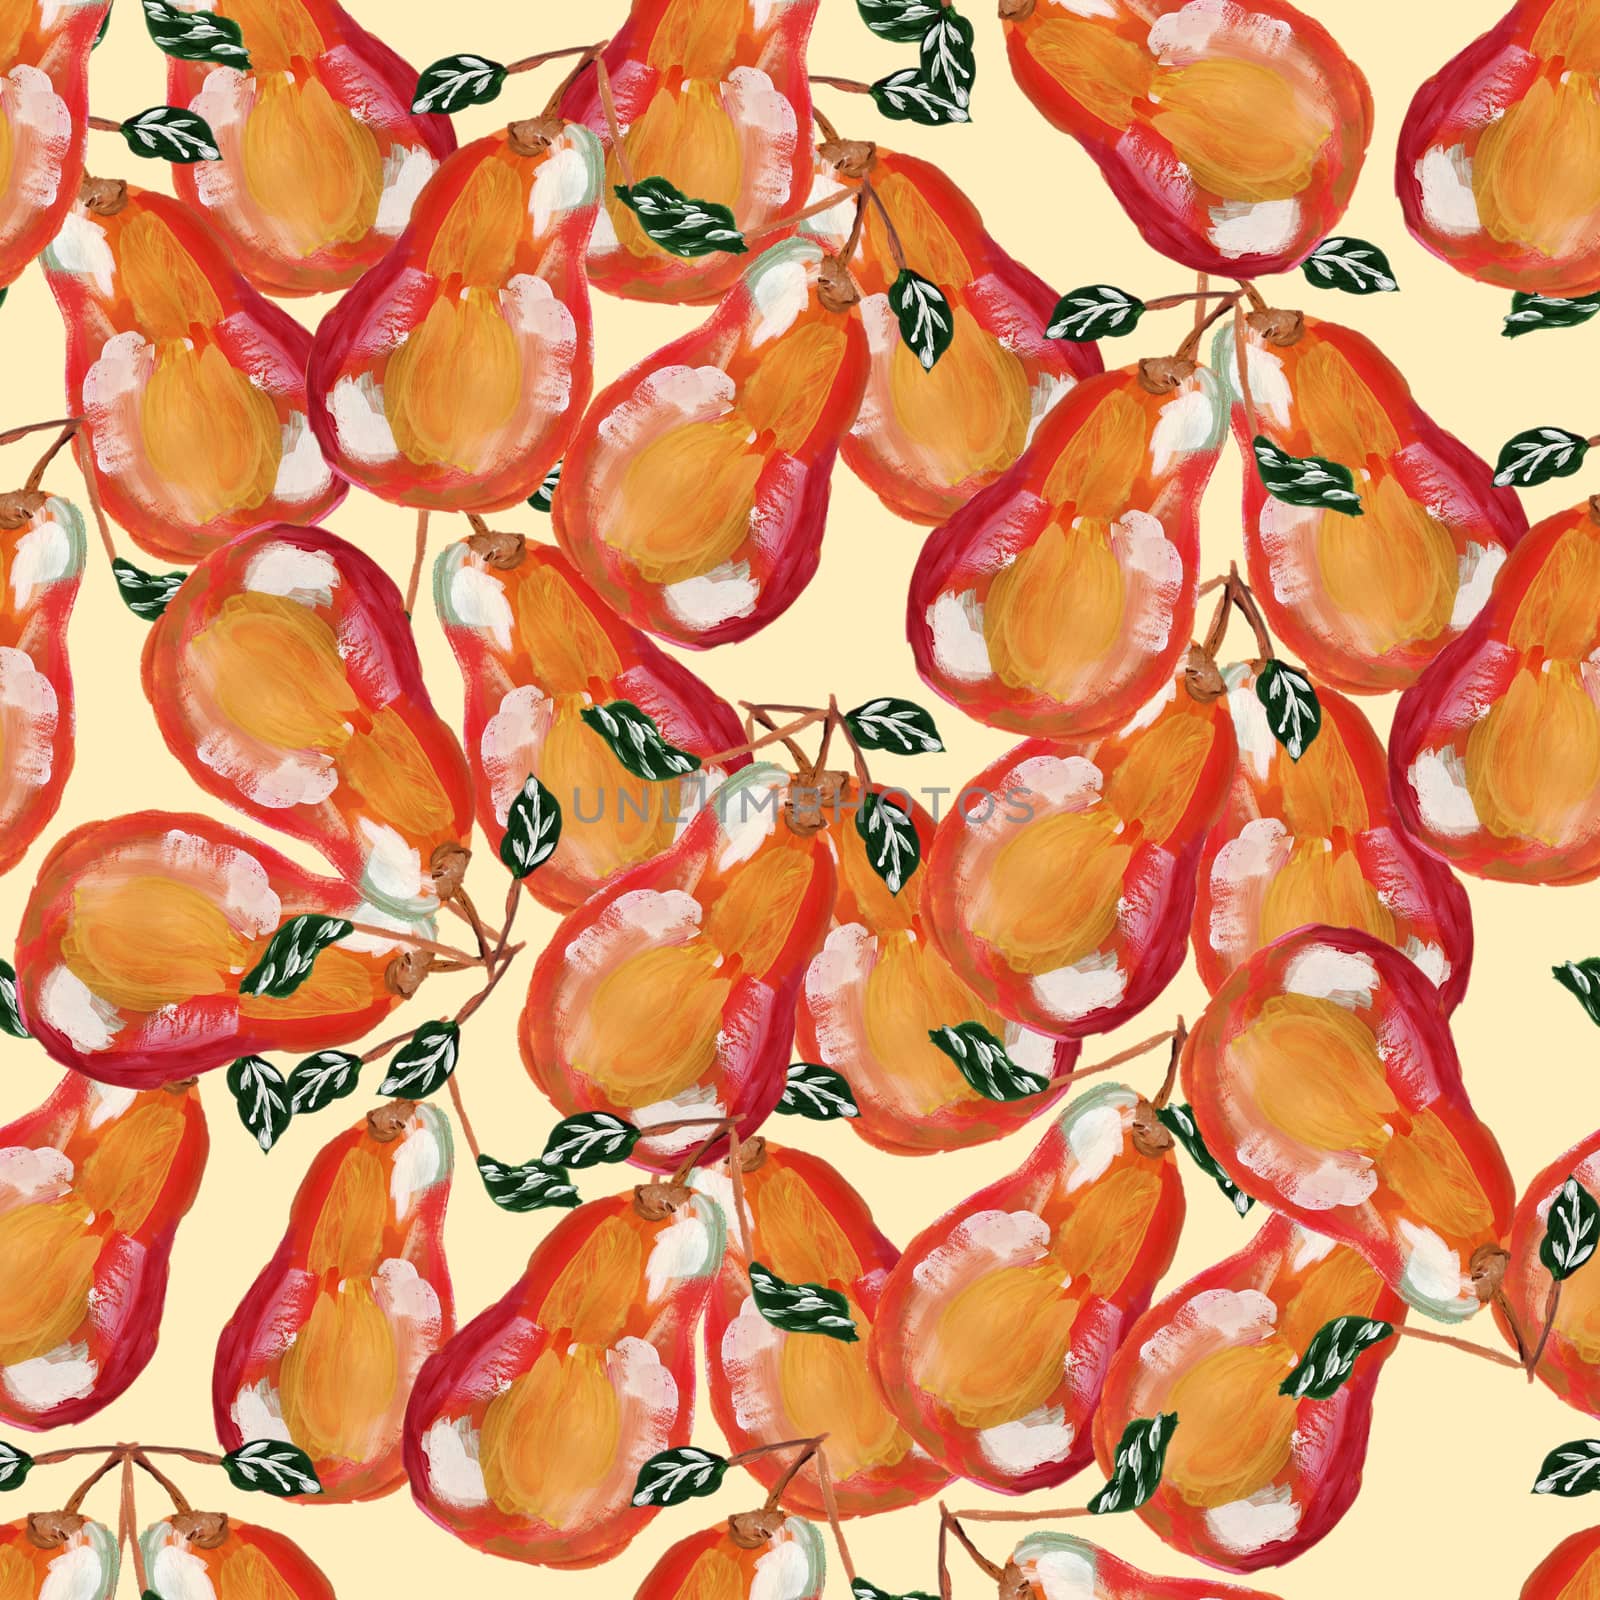 Ripe pears and leaves seamless pattern on yellow. Pear hand drawn style repeat illustration for print, textile, fabric, textile, wallpaper, posters.